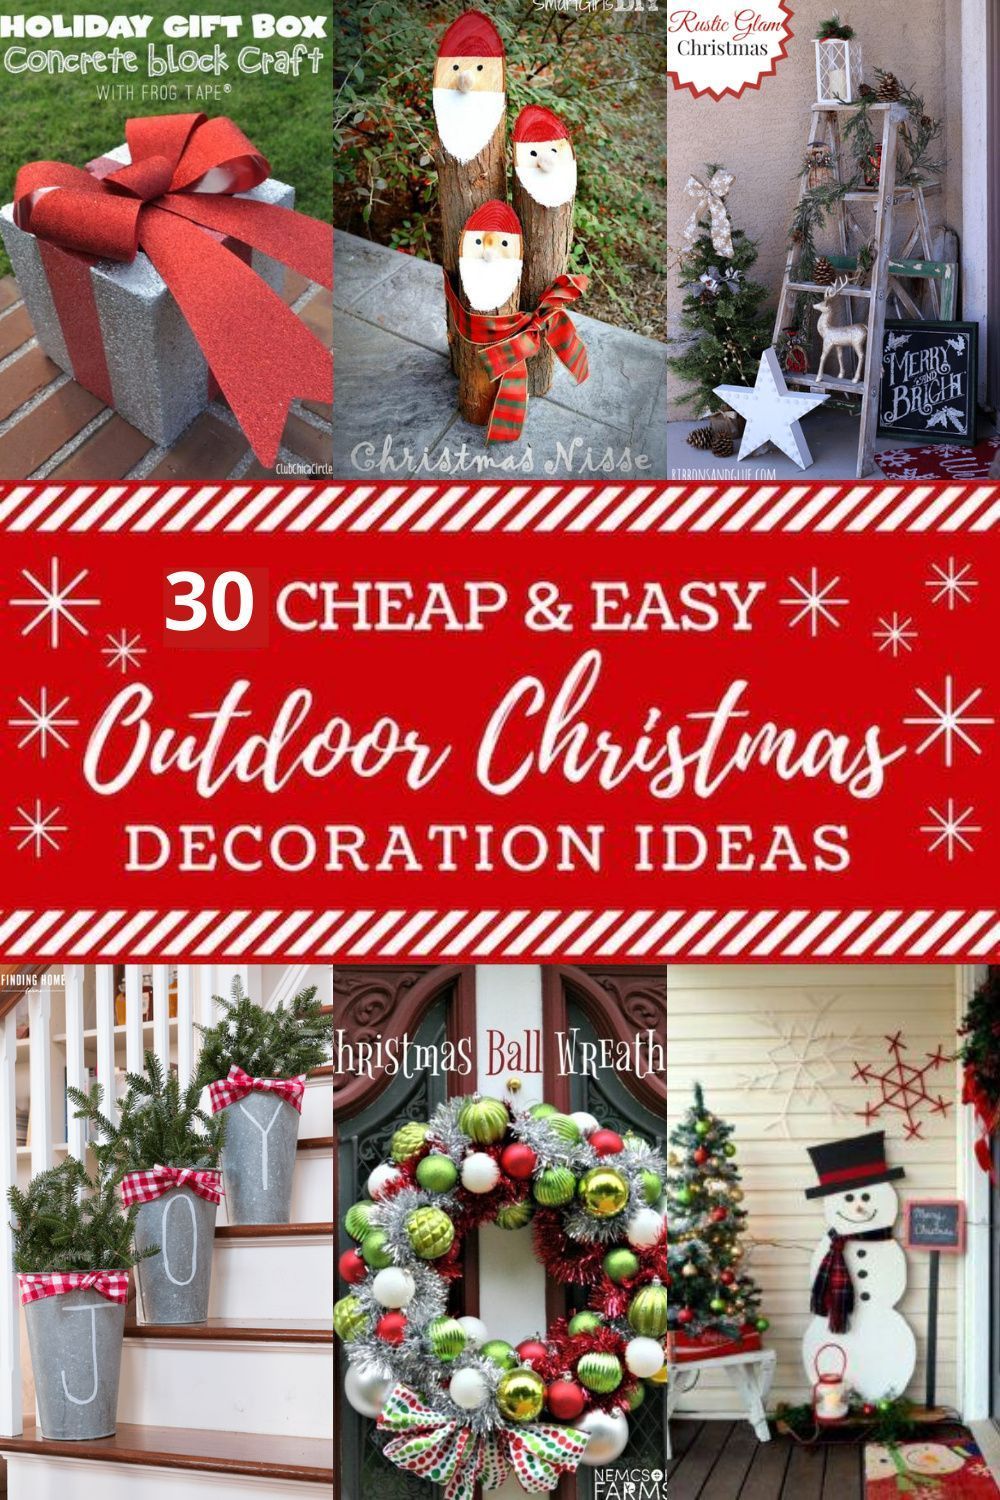 30 Cheap And Easy Outdoor Christmas Decoration Ideas -   19 diy christmas decorations easy outdoor ideas